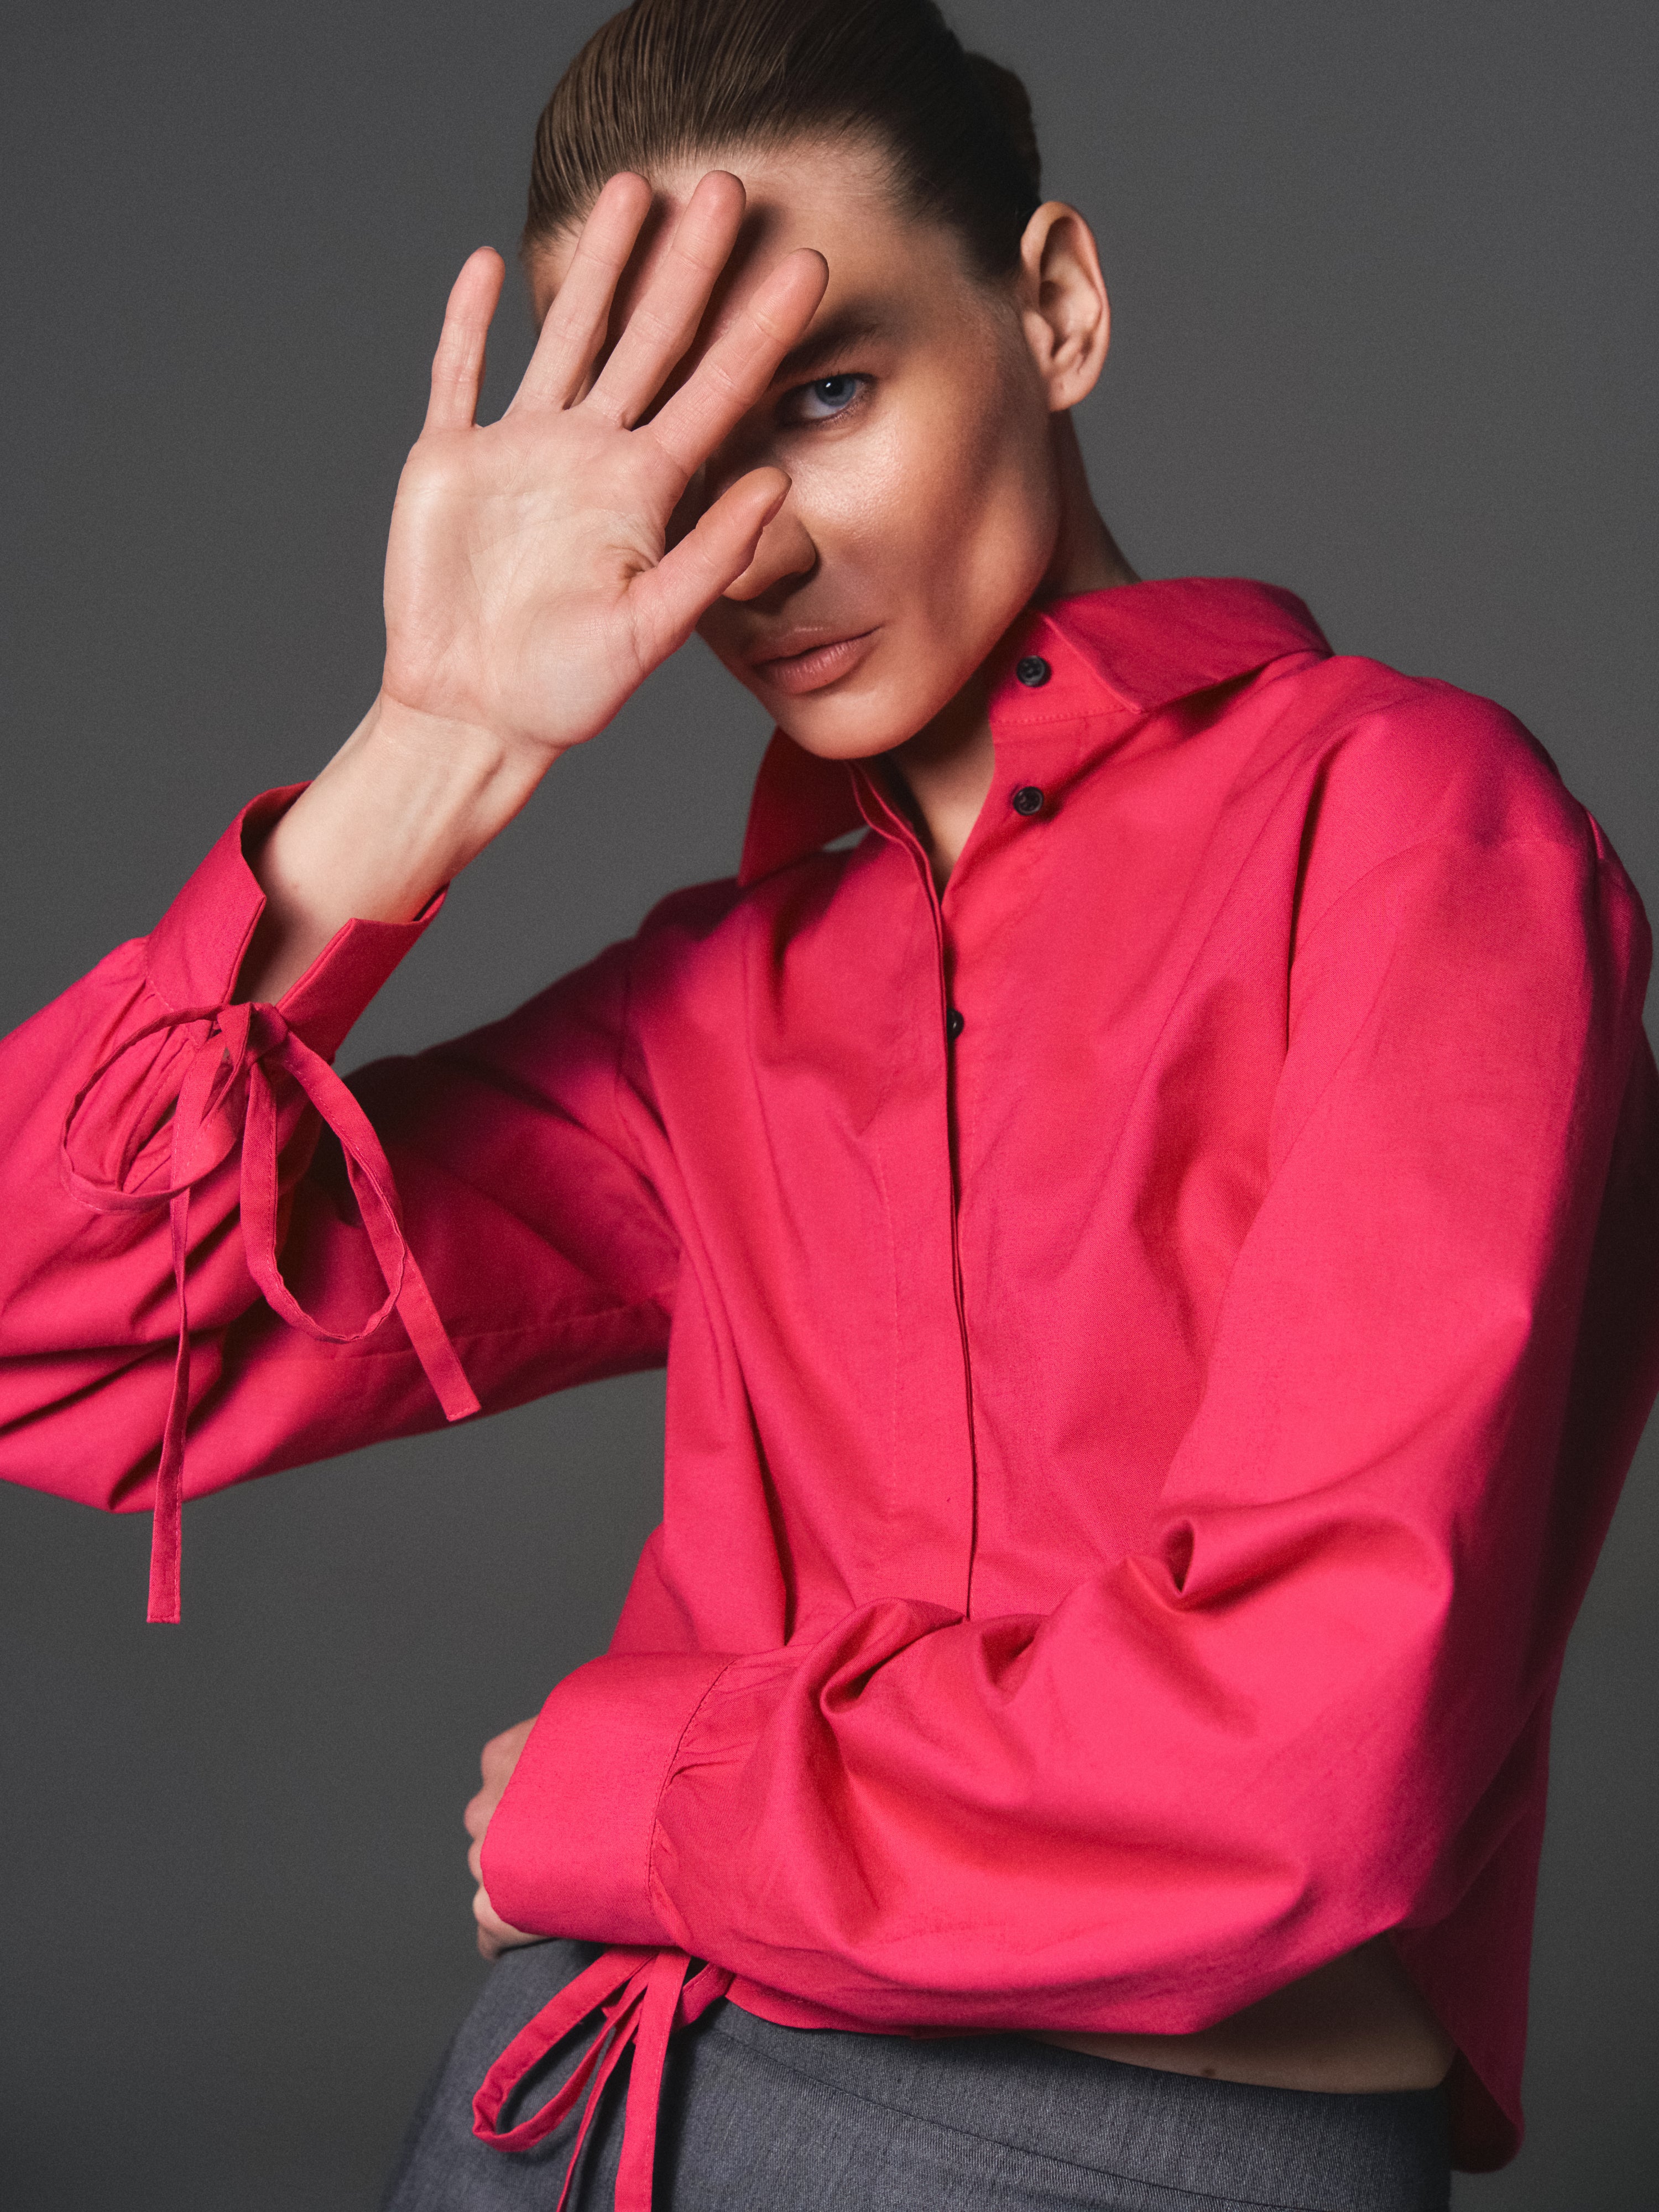 A model posing wearing a sustainable organic 100% cotton shirt in magenta color